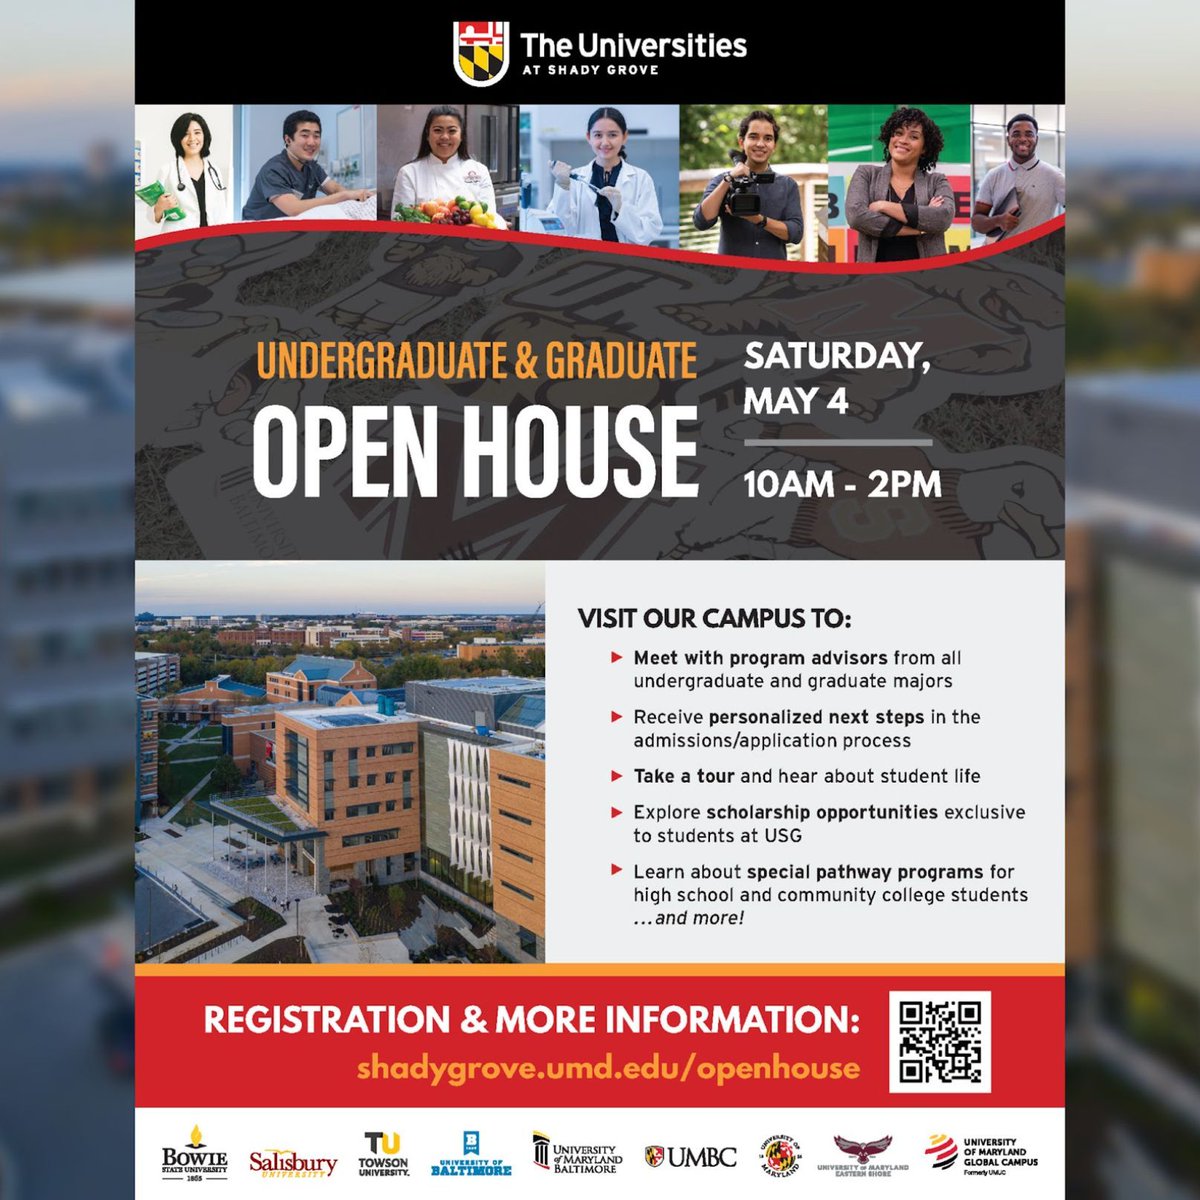 This Saturday, @UatShadyGrove is hosting an undergraduate and graduate open house—learn more about their programs:  shadygrove.umd.edu/openhouse